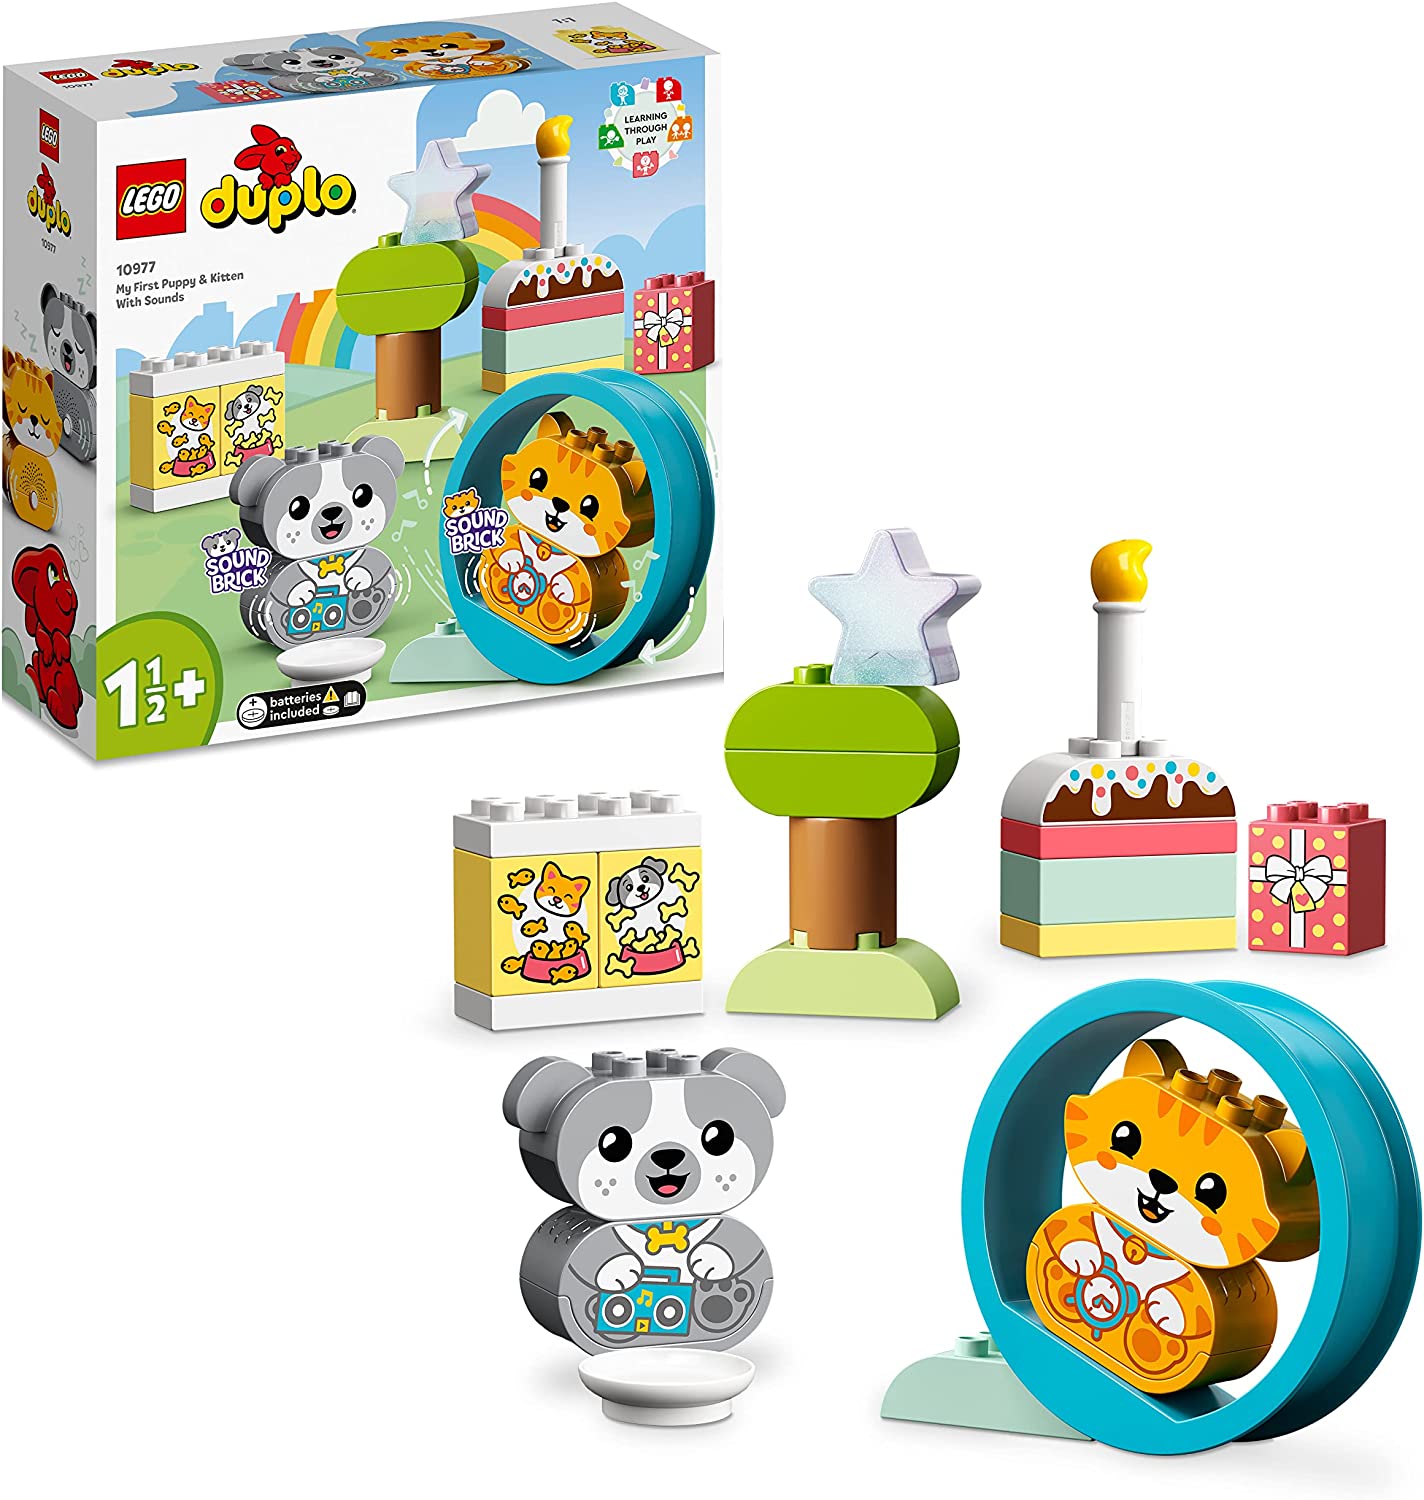 LEGO 10977 DUPLO My First Puppy & Kitten - with Sound, Toy Set with Animals for Building, Stones for Toddlers from 1.5 Years